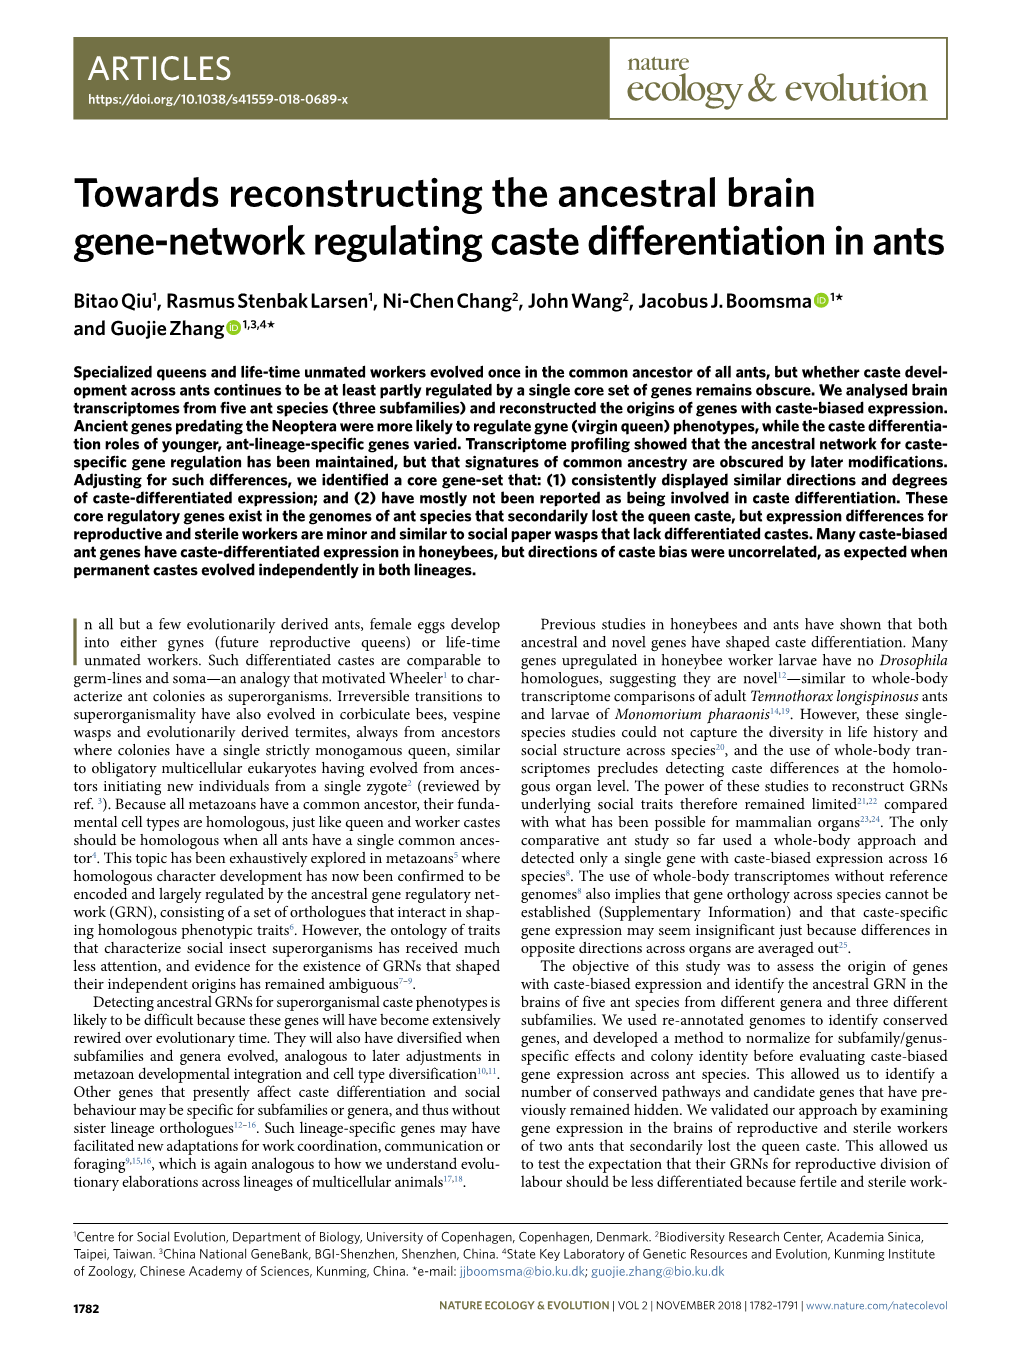 Towards Reconstructing the Ancestral Brain Gene-Network Regulating Caste Differentiation in Ants